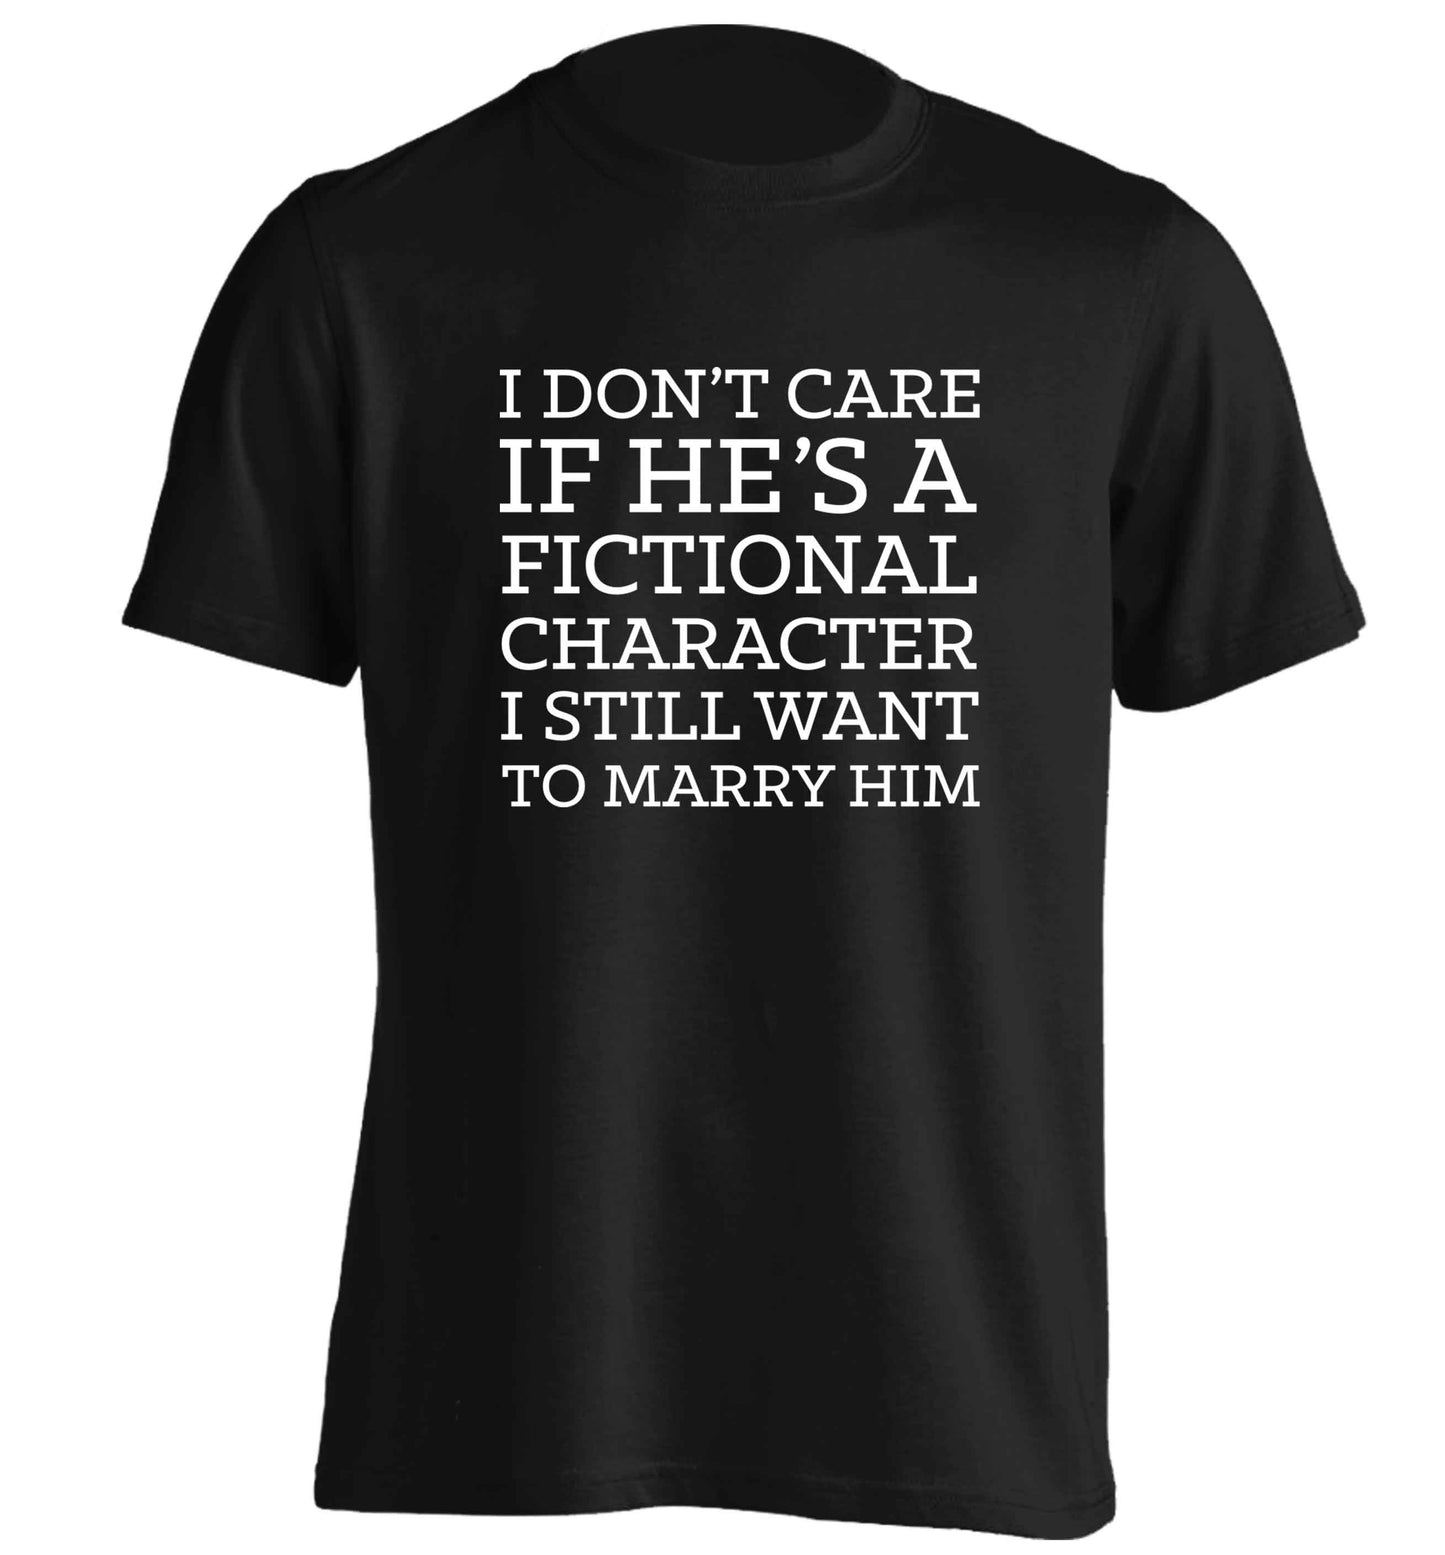 I don't care if he's a fictional character I still want to marry him adults unisex black Tshirt 2XL